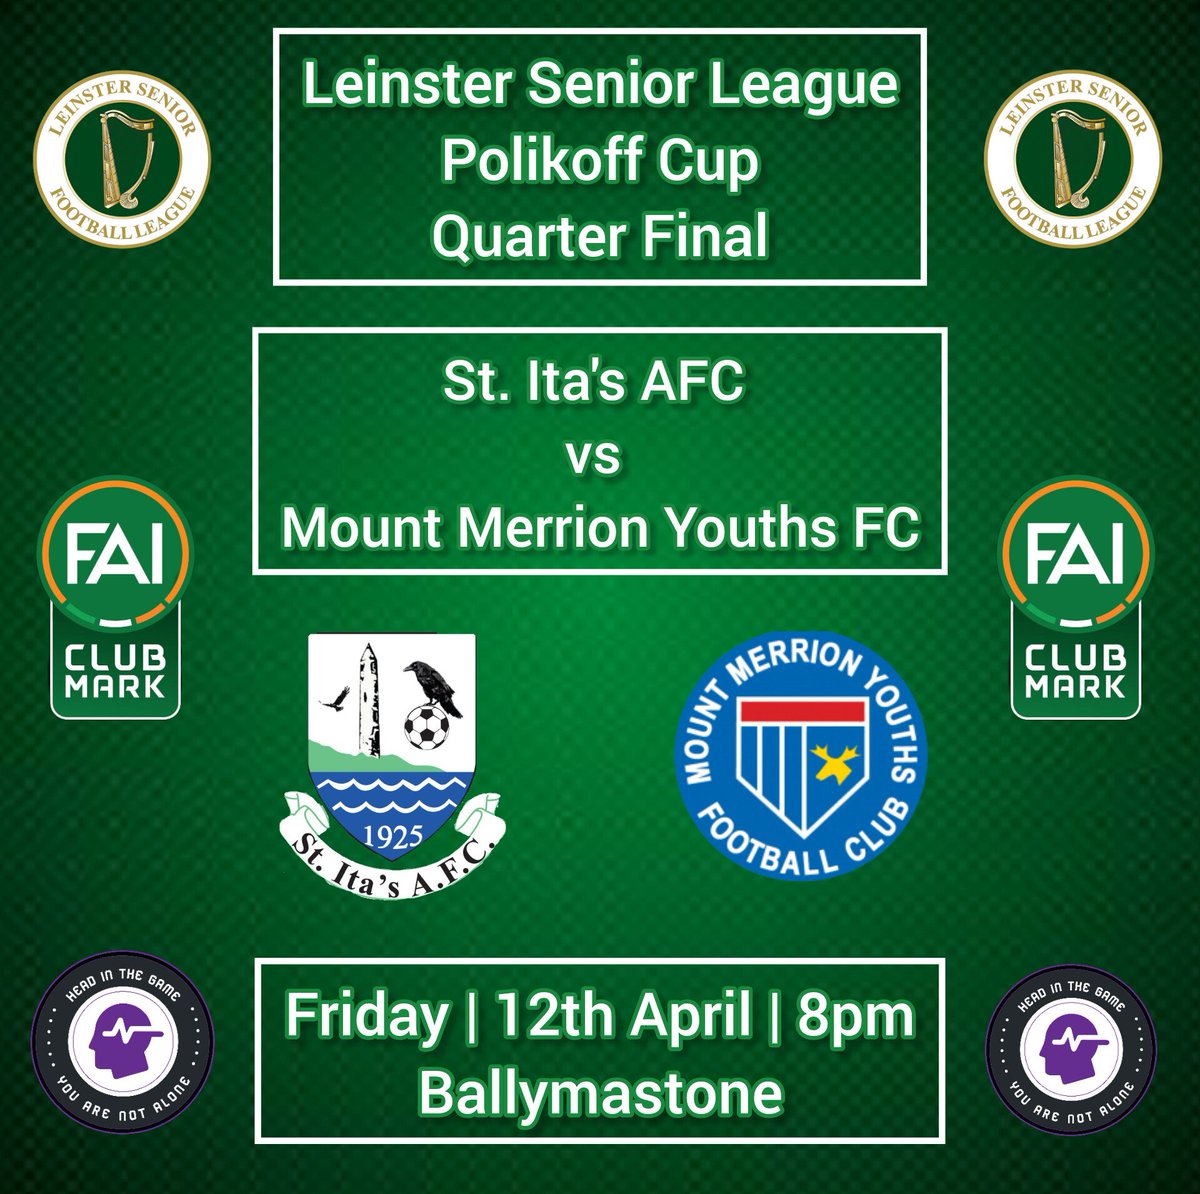 🟢⚪️ Polikoff Cup QF Draw 🟢⚪️

We have been drawn to play @mountmerrion in the Quarter Finals of the @LSLLeague Polikoff Cup. 

The game will be played on Friday, 12th April, in Ballymastone. 

#stitasafc 
#thesaintsarecoming 
#weareitas 
#upthehoops 

@AlQuinn2015